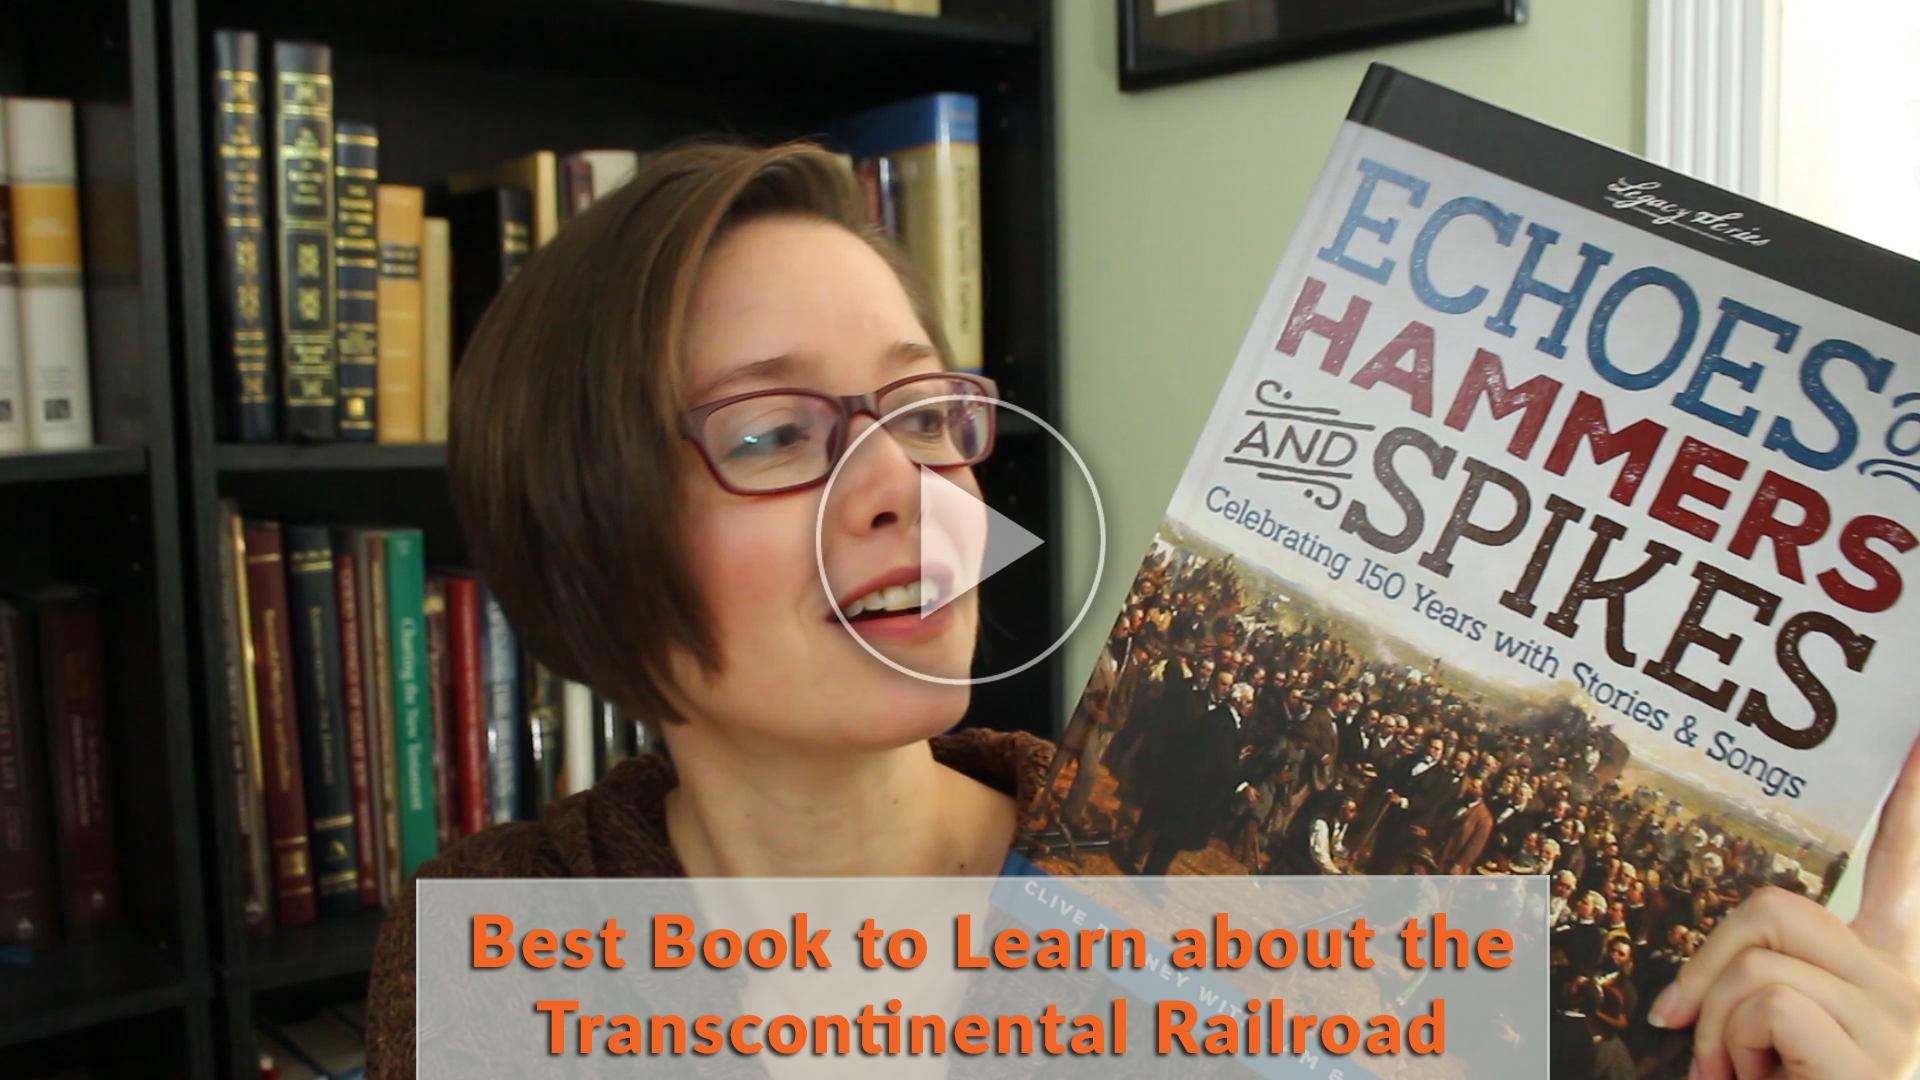 Transcontinental railroad living history book review